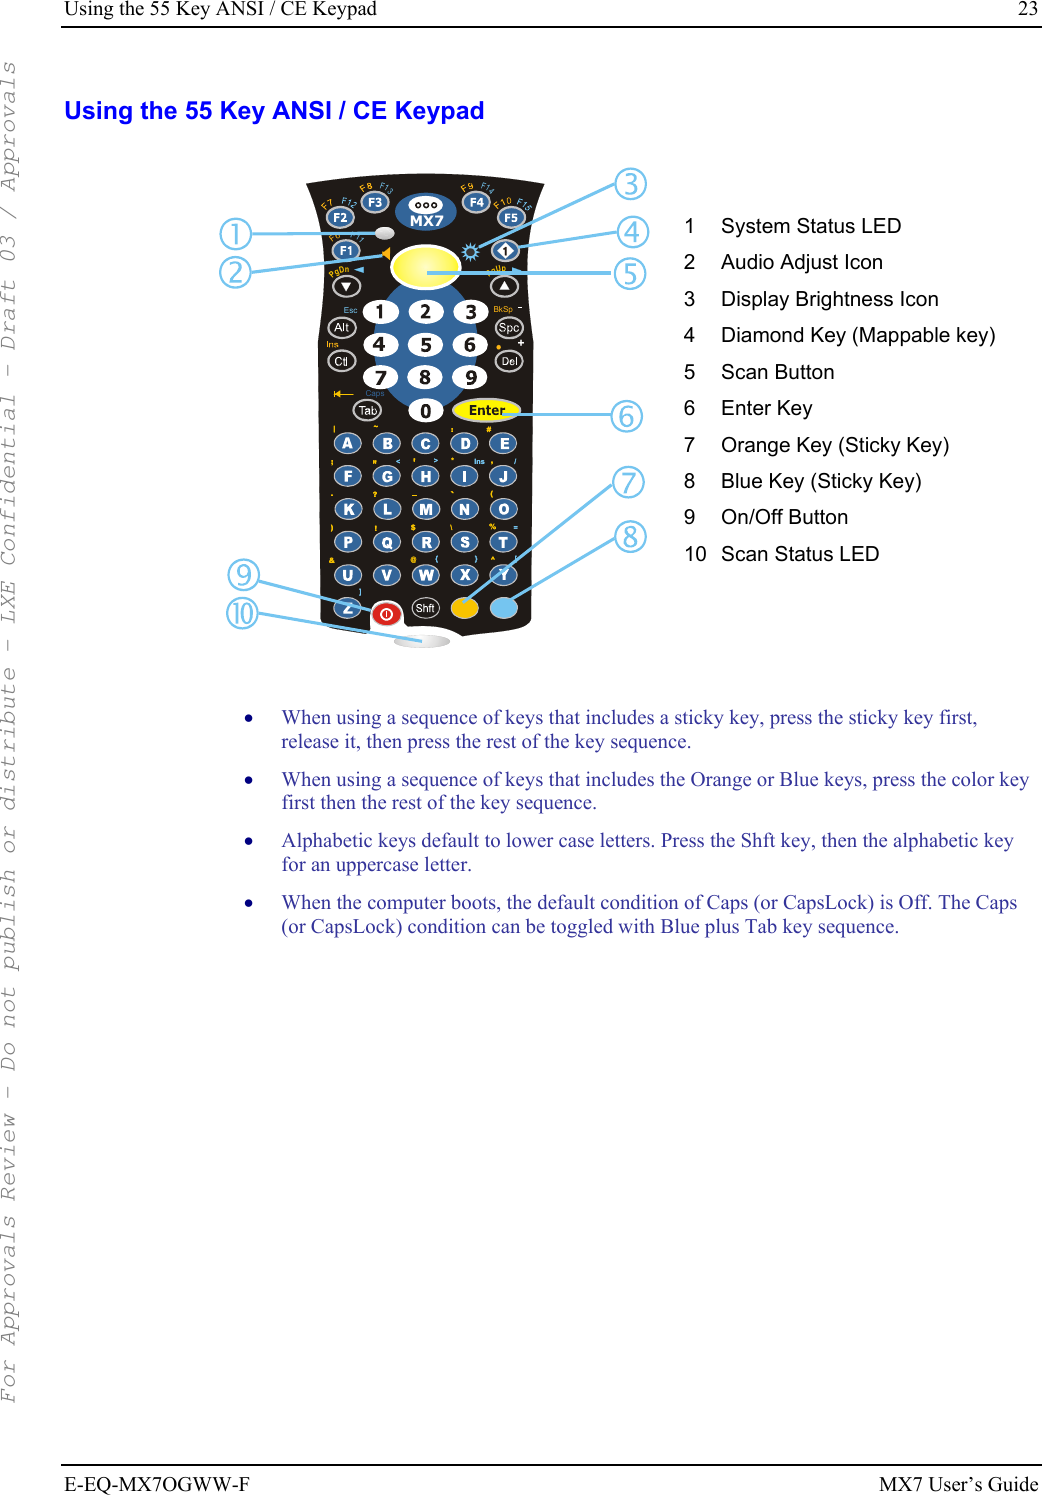 Using the 55 Key ANSI / CE Keypad  23 E-EQ-MX7OGWW-F MX7 User’s Guide Using the 55 Key ANSI / CE Keypad BkSp+F11MX7PgDnPgUpF6F13F14CapsEsc|~:#;*,&gt;/Ins&lt;.(?=)\!$%^&amp;@}{[]|~:#;*,&gt;/Ins&lt;.(?=)\!$%^&amp;@}{[] 1  System Status LED 2  Audio Adjust Icon 3  Display Brightness Icon 4  Diamond Key (Mappable key) 5 Scan Button 6 Enter Key 7  Orange Key (Sticky Key) 8  Blue Key (Sticky Key) 9 On/Off Button 10 Scan Status LED   • When using a sequence of keys that includes a sticky key, press the sticky key first, release it, then press the rest of the key sequence.  • When using a sequence of keys that includes the Orange or Blue keys, press the color key first then the rest of the key sequence.  • Alphabetic keys default to lower case letters. Press the Shft key, then the alphabetic key for an uppercase letter. • When the computer boots, the default condition of Caps (or CapsLock) is Off. The Caps (or CapsLock) condition can be toggled with Blue plus Tab key sequence.    For Approvals Review - Do not publish or distribute - LXE Confidential - Draft 03 / Approvals